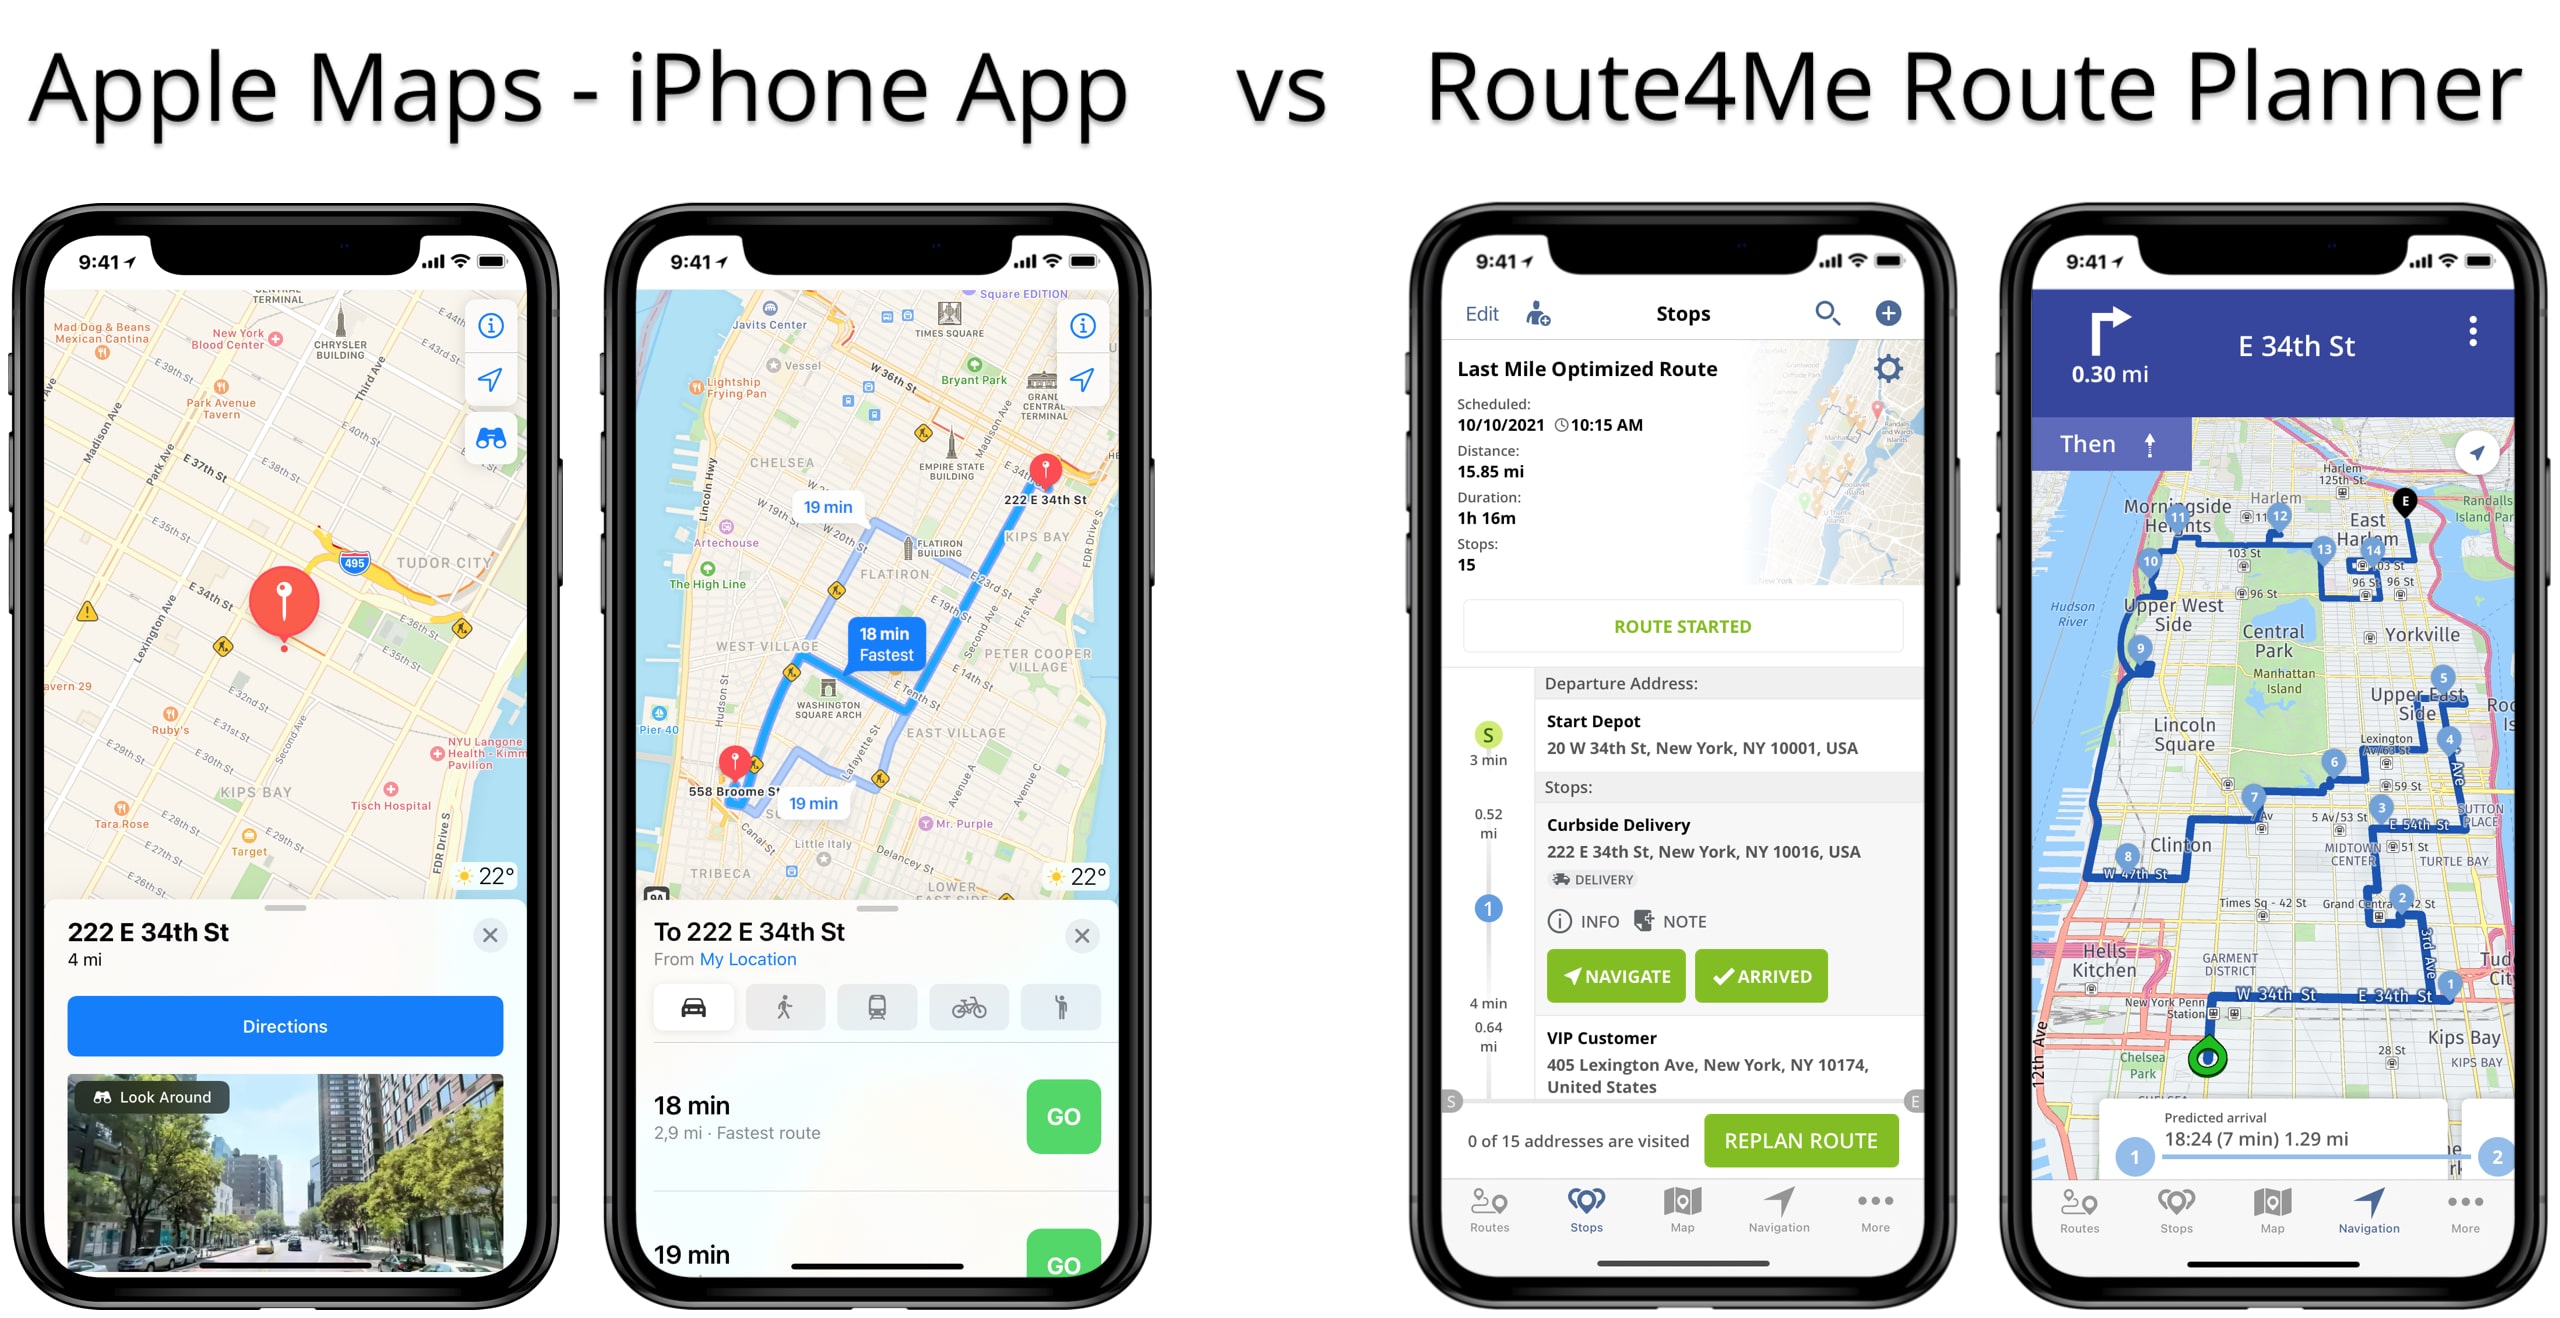 Apple Maps vs Route4Me Route Planner app for last mile delivery route planning and optimization.